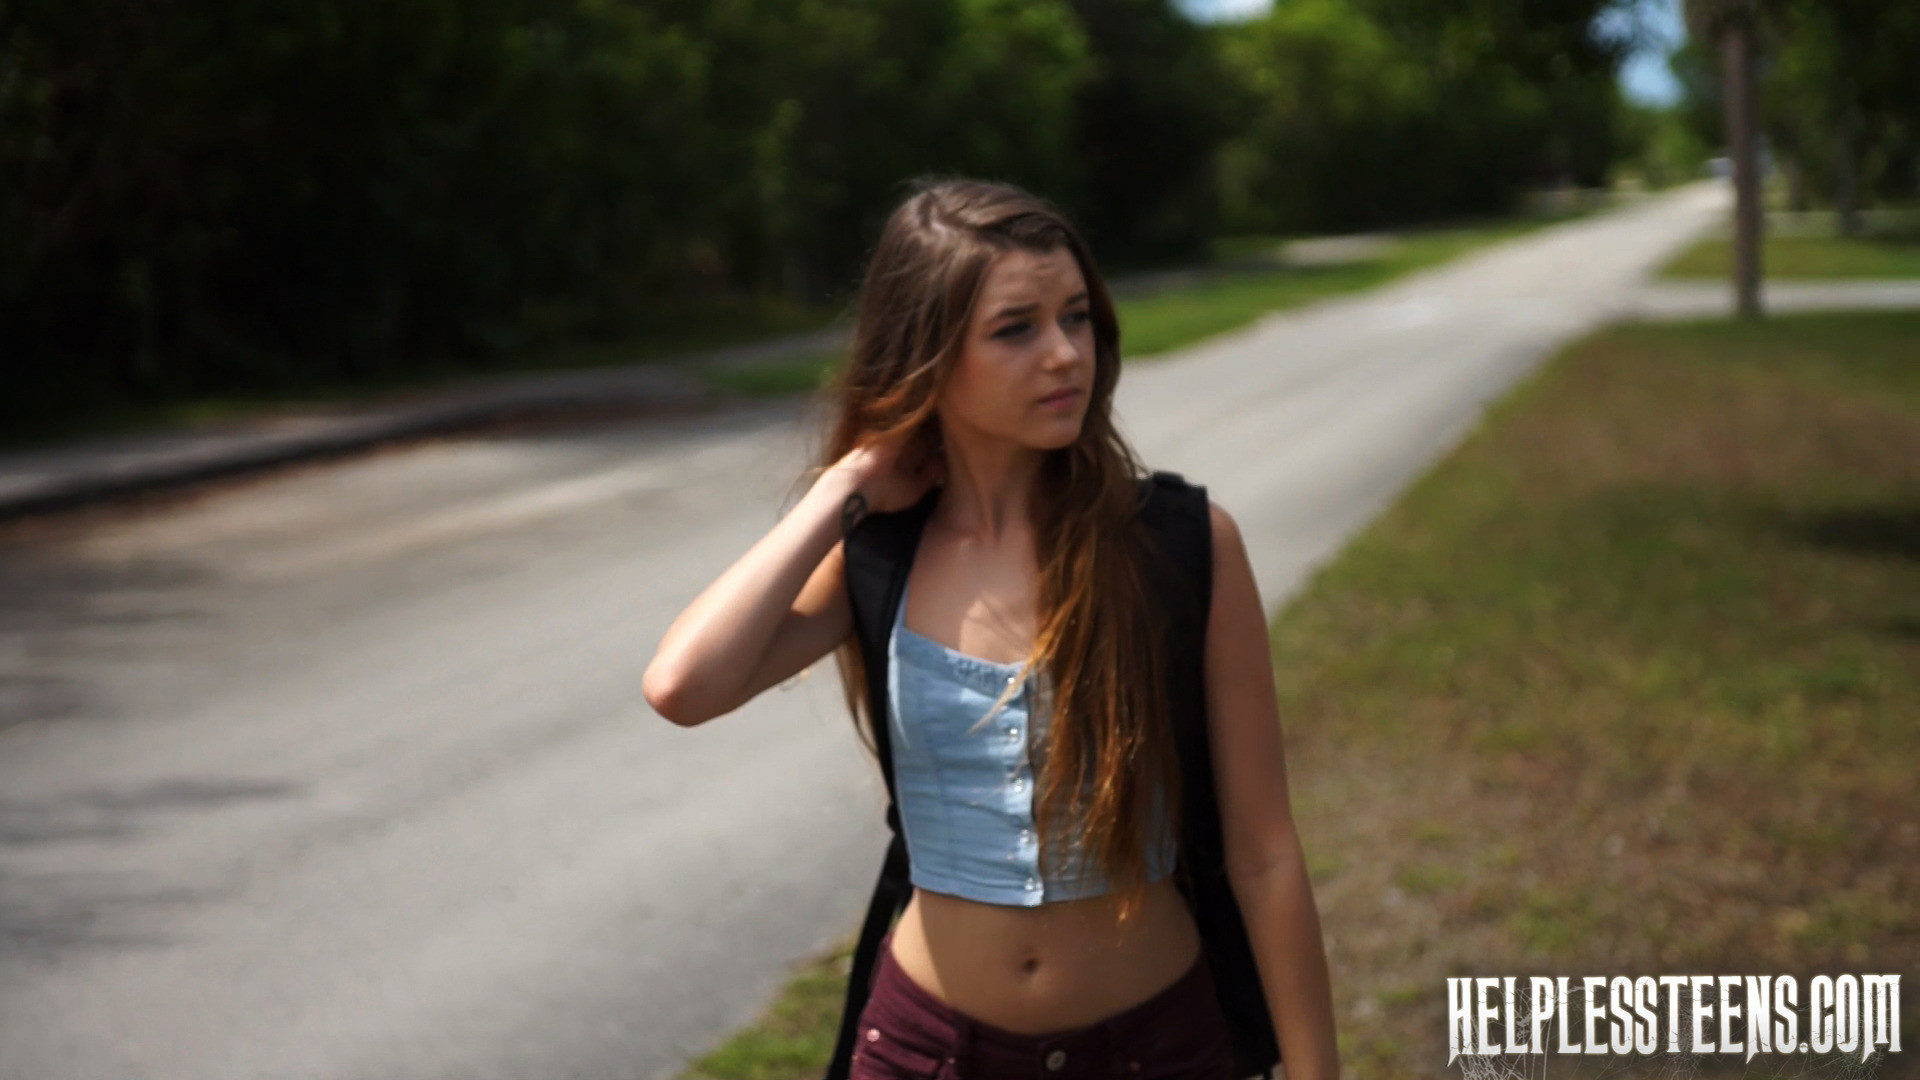 Helpless teen Alex Mae went out for a hike. She took a wrong turn and is now los #71867474